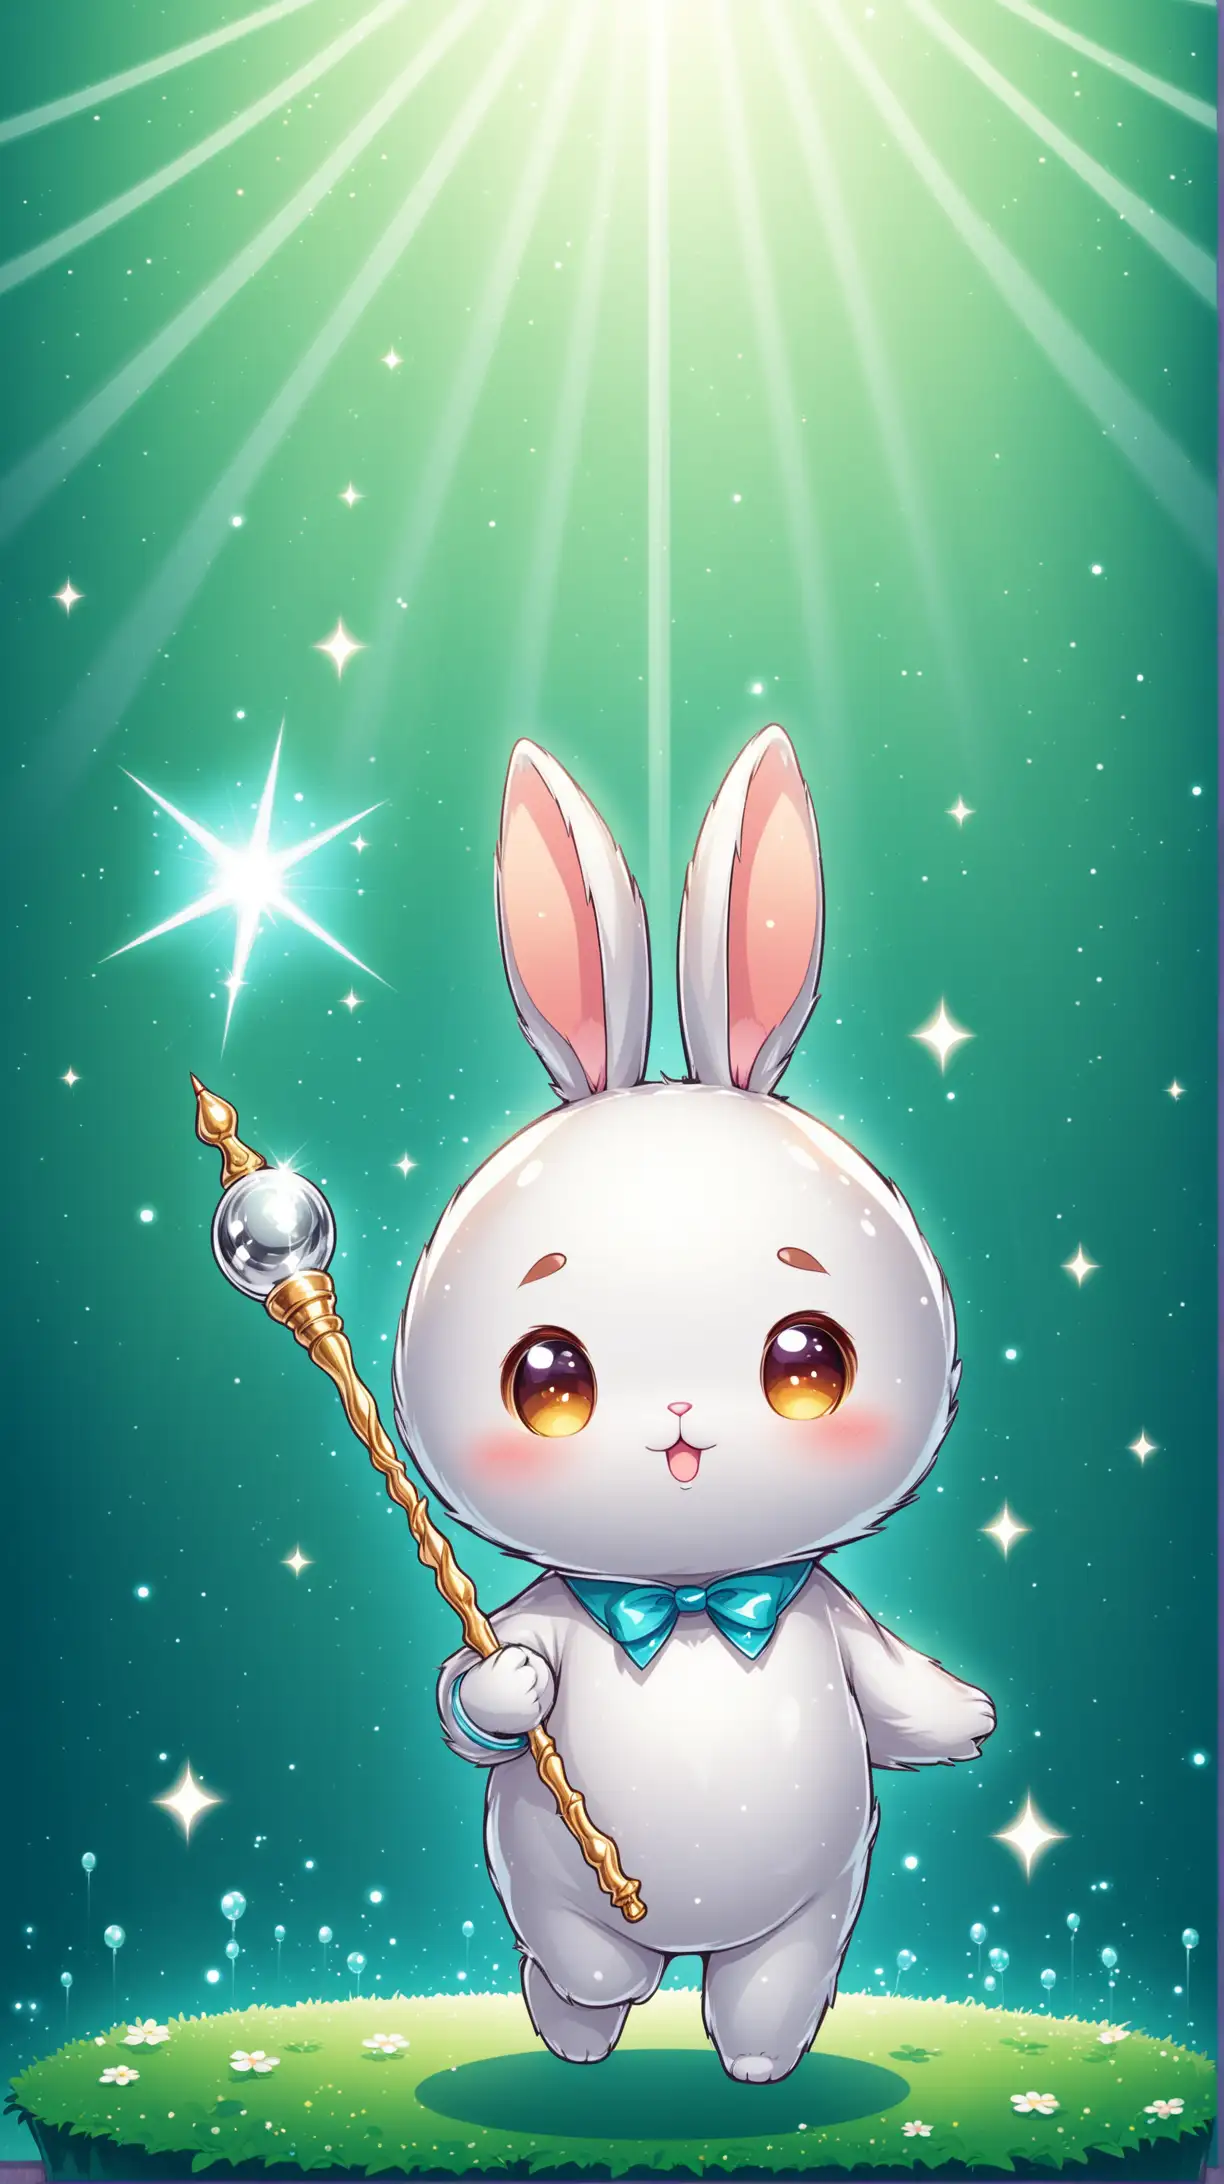 Magical Silver Rabbit Cartoon Character with Wand